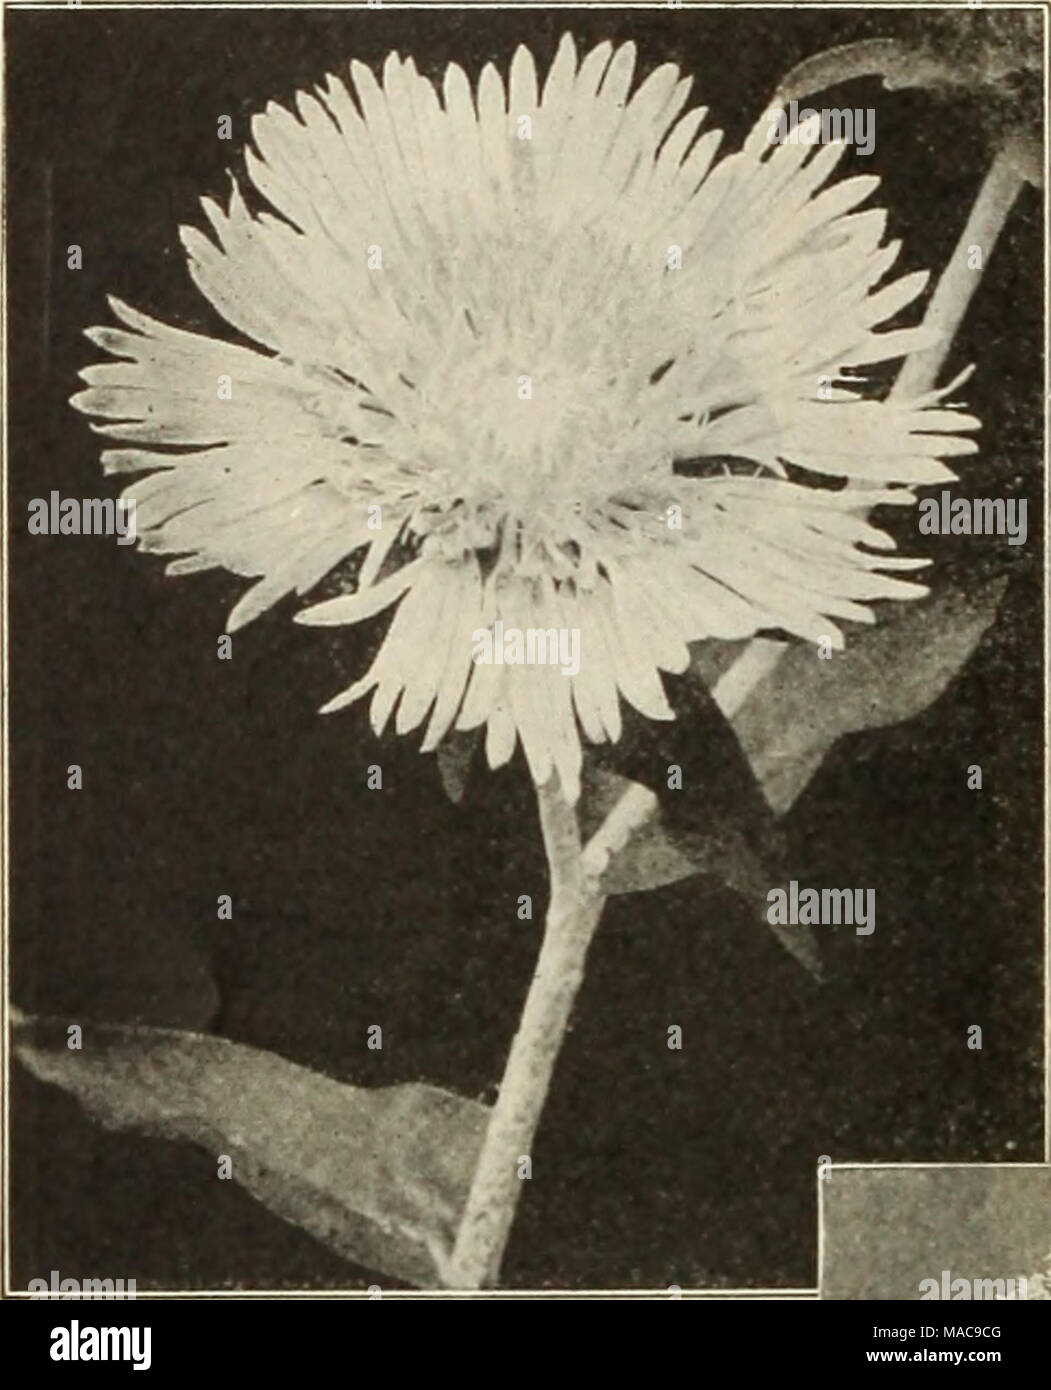 . Dreer's mid-summer list 1925 . Stokesia (Cornflower Aster) Statice (Sea Lavender) Splendid hardy perennials, either for the border or rockery, producing all summer panicles of minute flowers, which can be dried, and used for winter bouquets. PER PKT. 3997 Latifolia. Purplish-blue flowers. (See cut.) J oz., SO cts $0 10 4000 Mixed. Containing many sorts Sweet Rocket (Hesperis) PER PKT. 4280 Old-fashioned garden plants; also known as Dame's Rocket and Dame's Violet; grows from 2 to 3 feet high, and bears spikes of showy white, lilac and purple fragrant flowers. Excellent for naturalizing among Stock Photo